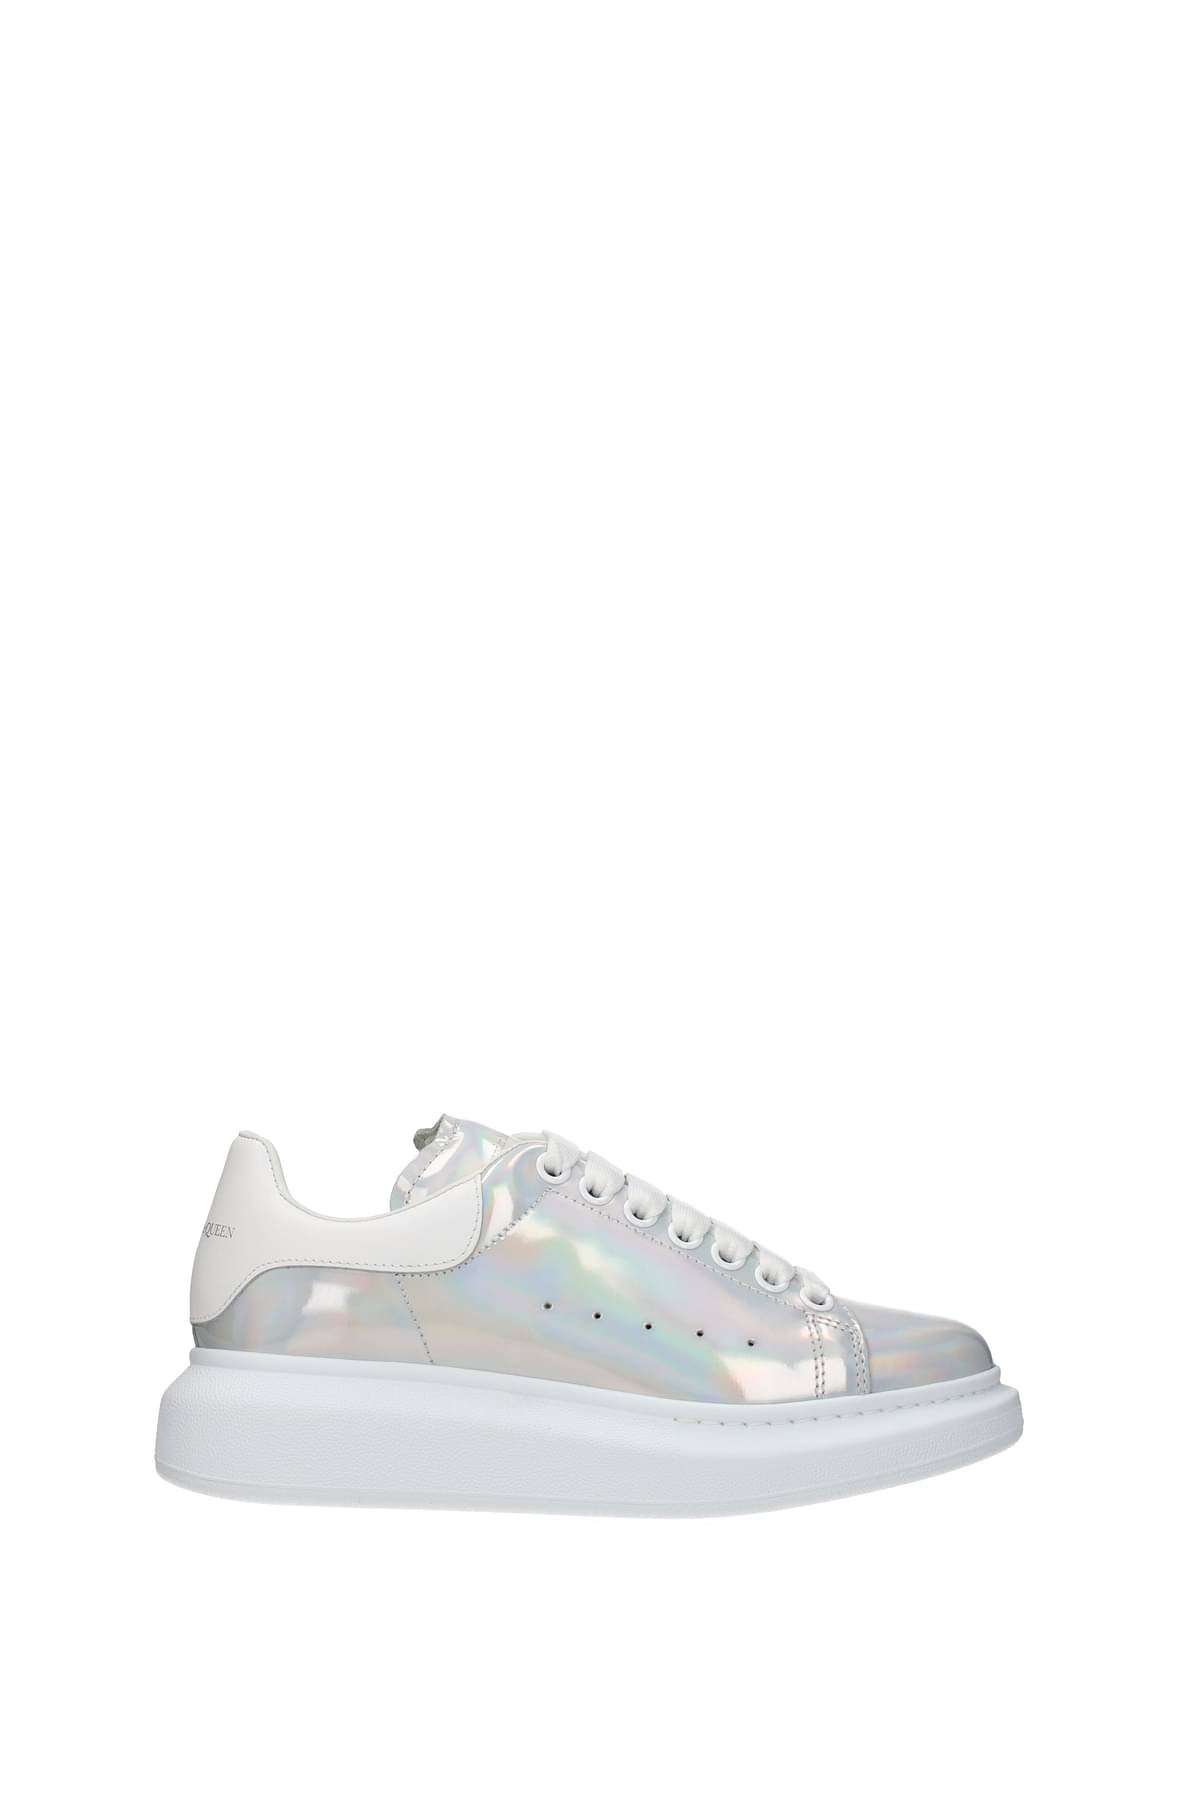 Alexander McQueen Sneakers oversize Women 718139WICT19000 Patent Leather  Silver White 472€